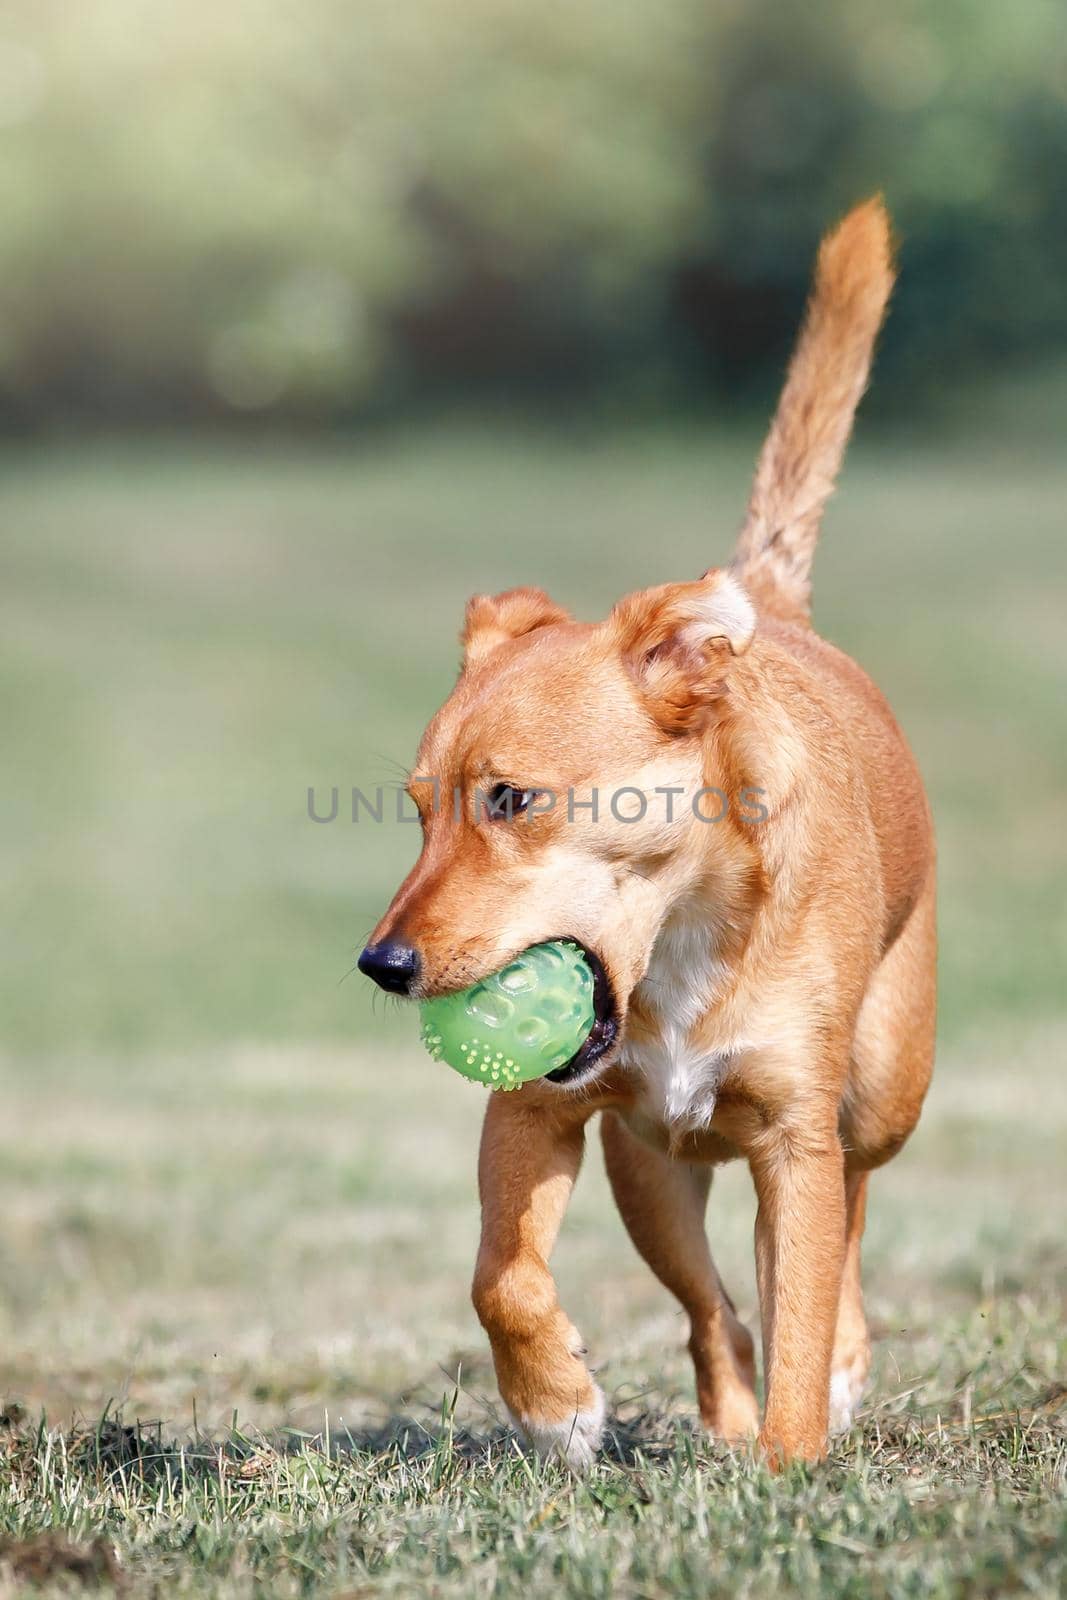 The brown dog ran with a raised tail and brought the green ball by Lincikas